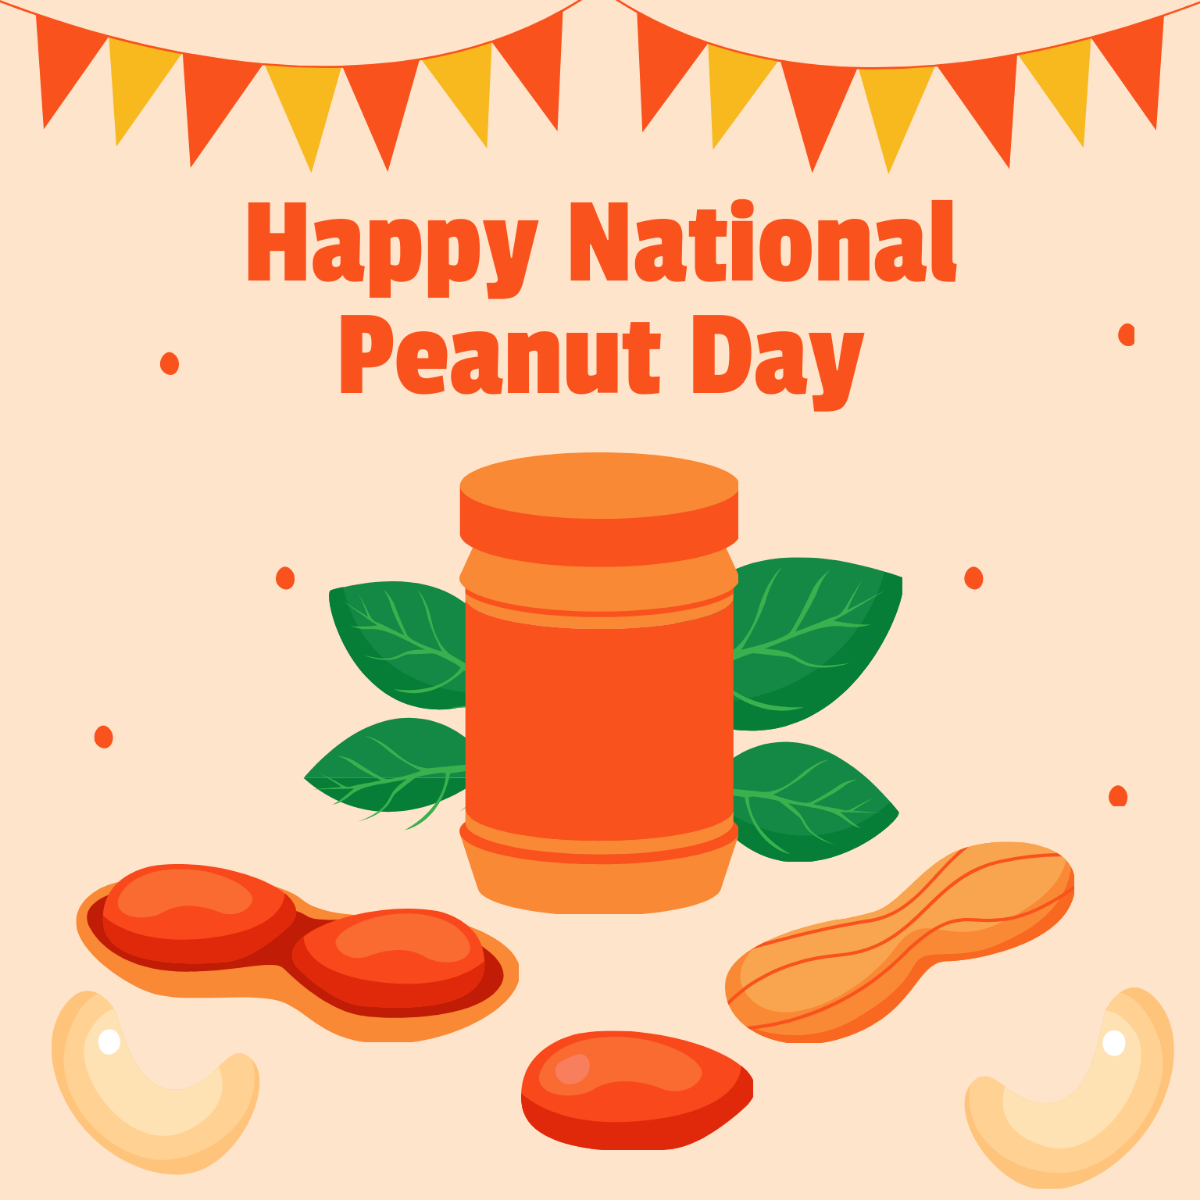 Happy National Peanut Day Illustration Template